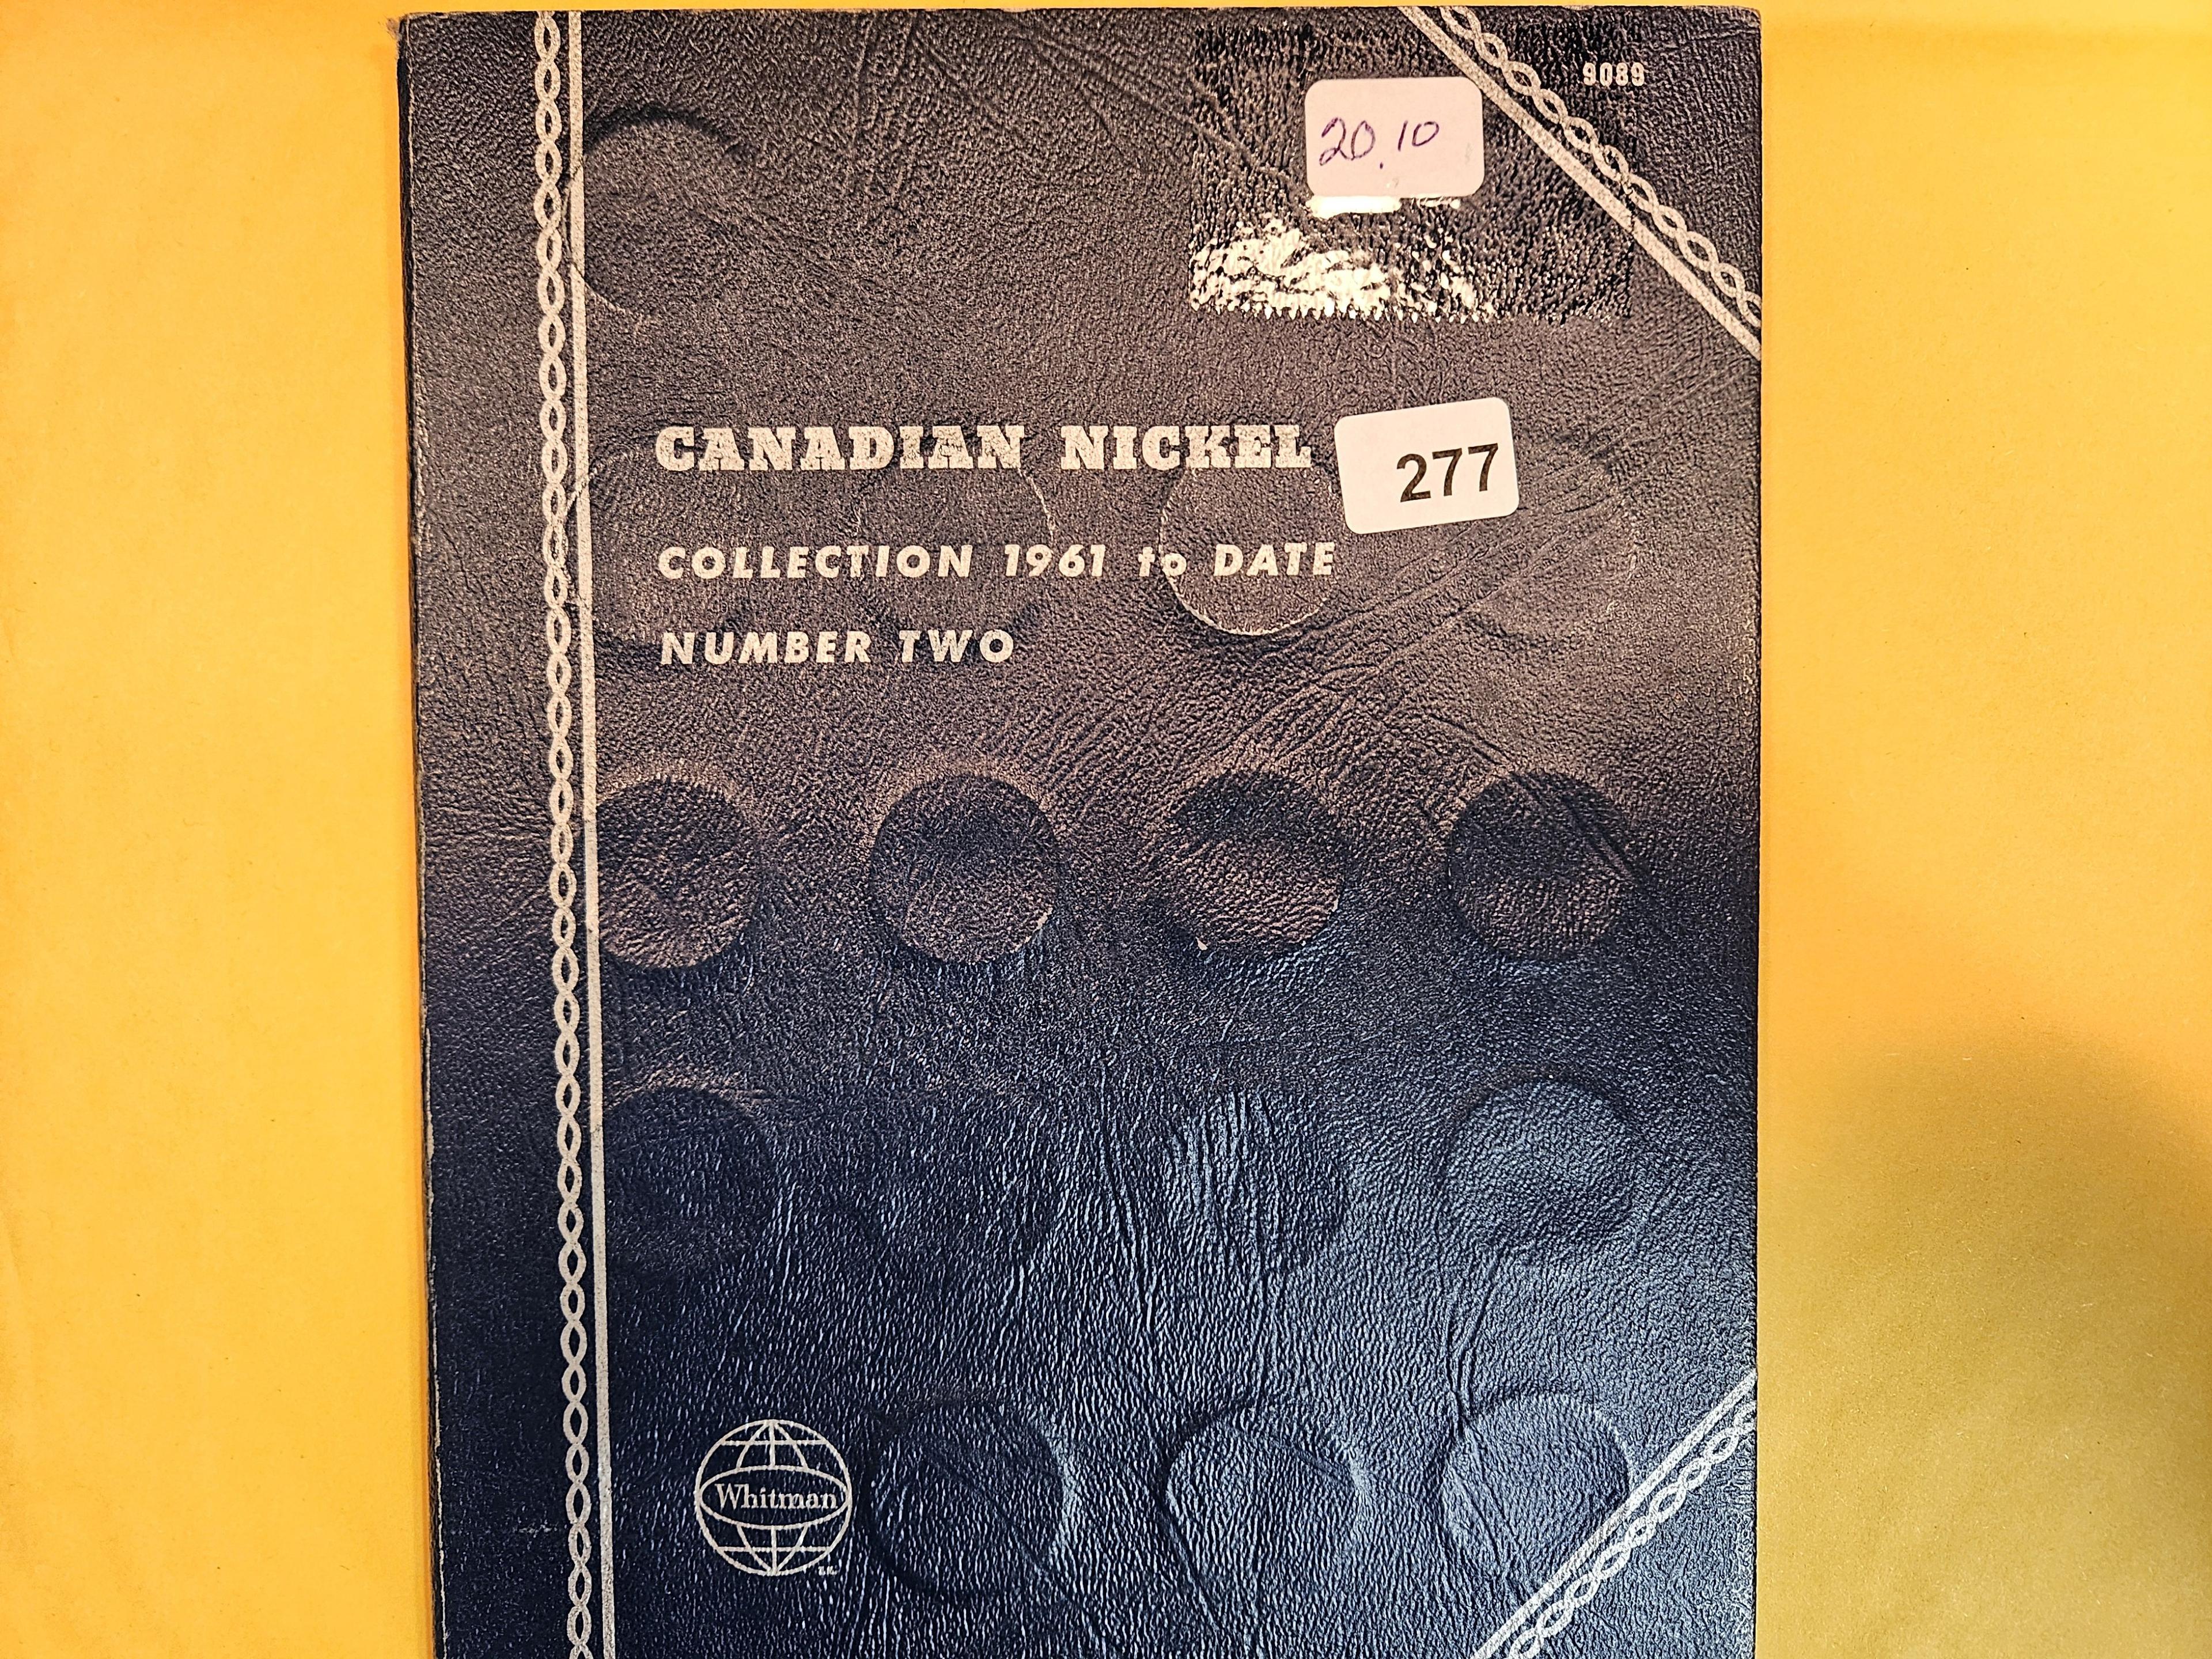 Canadian Nickel collection